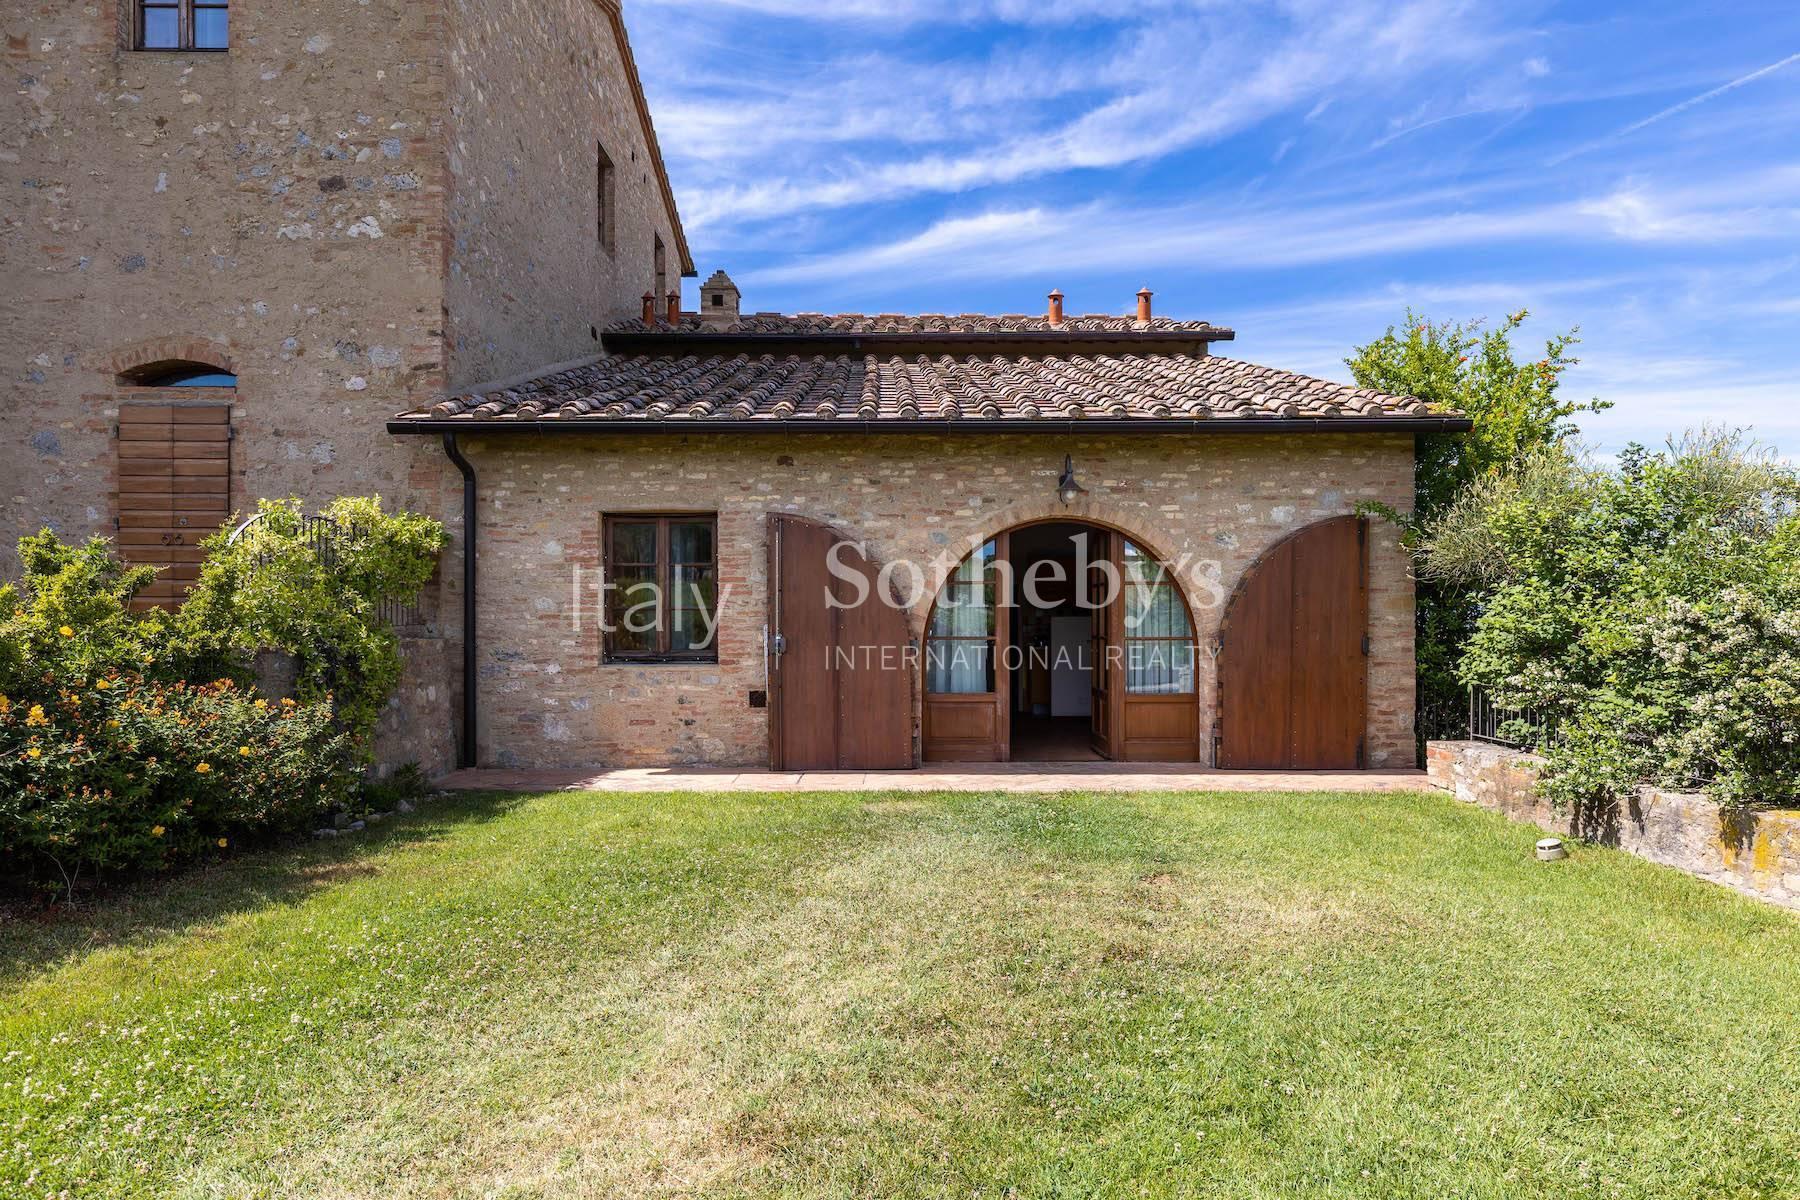 Winery with ancient country house in San gimignano - 29